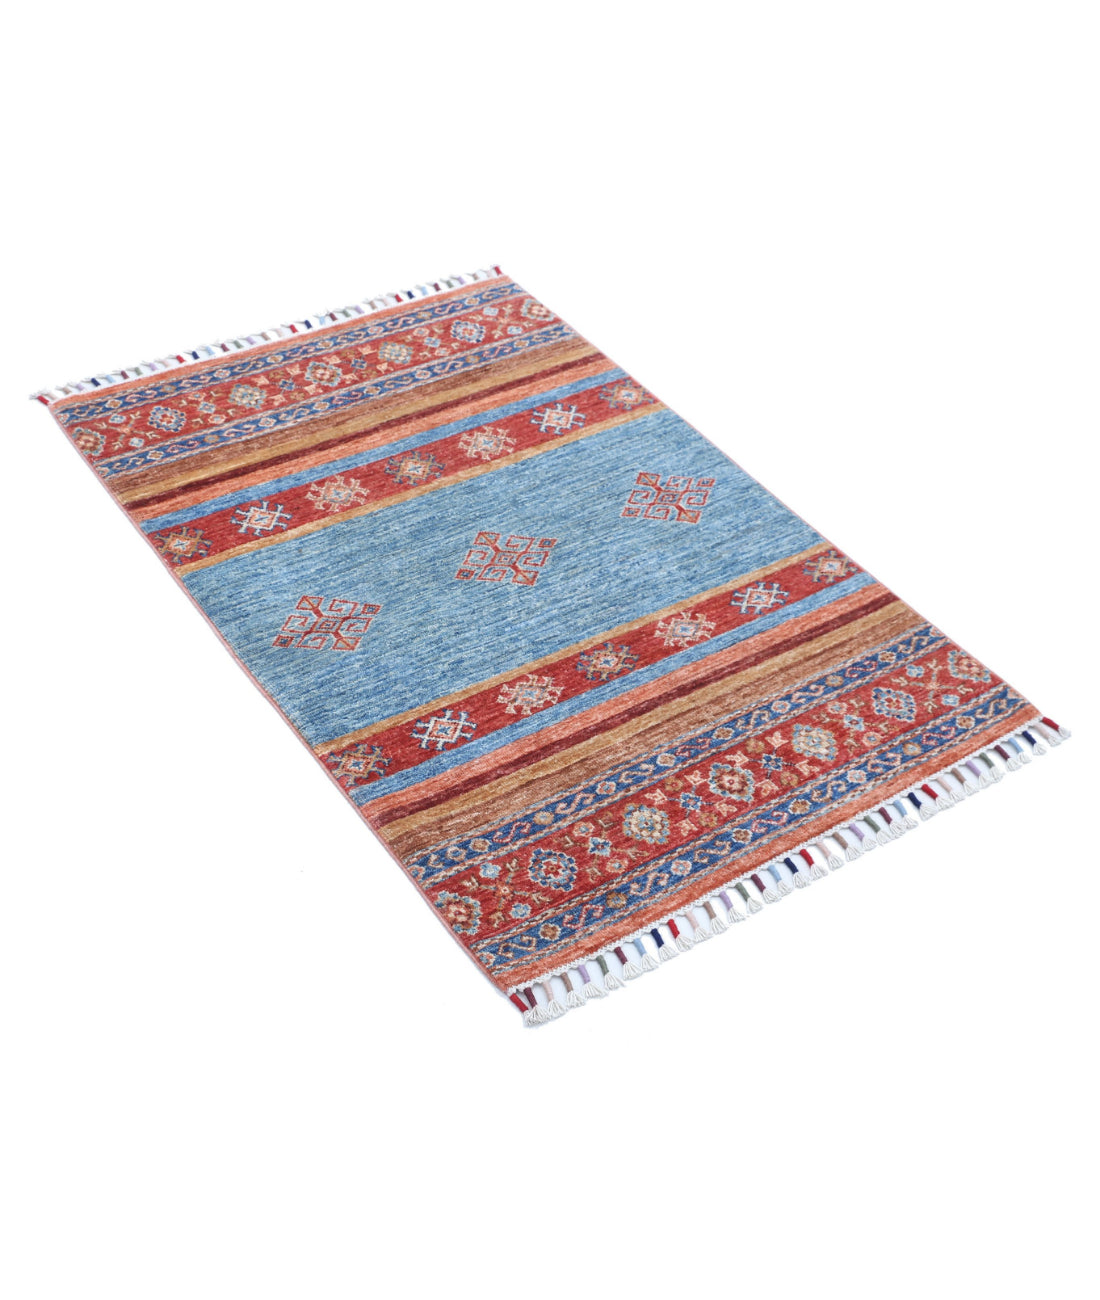 Hand Knotted Khurjeen Wool Rug - 2'7'' x 3'9'' 2'7'' x 3'9'' (78 X 113) / Multi / Multi